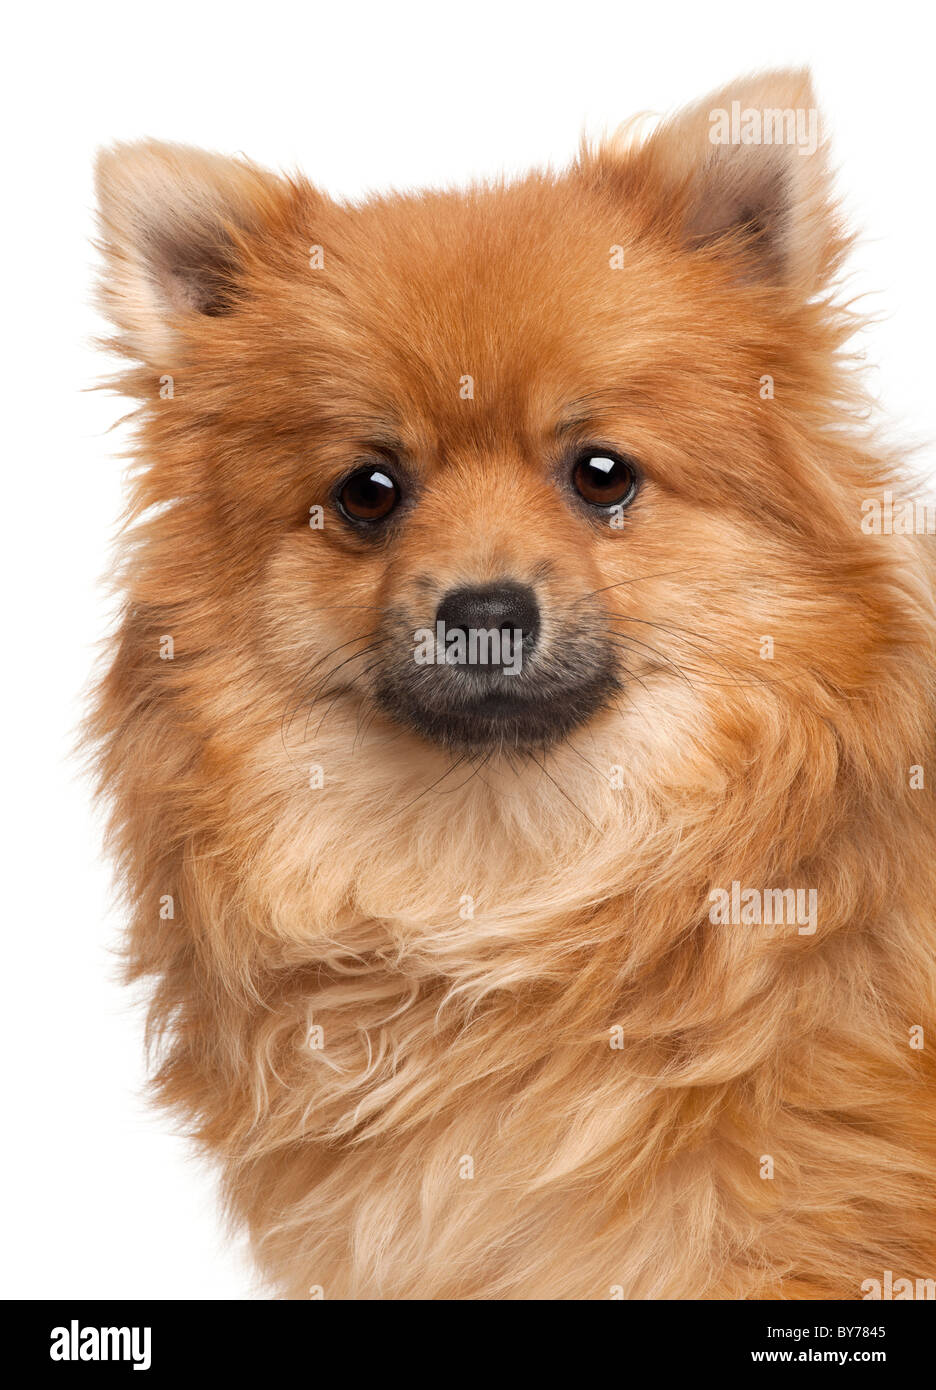 Spitz dog, 1 year old, in front of white background Stock Photo